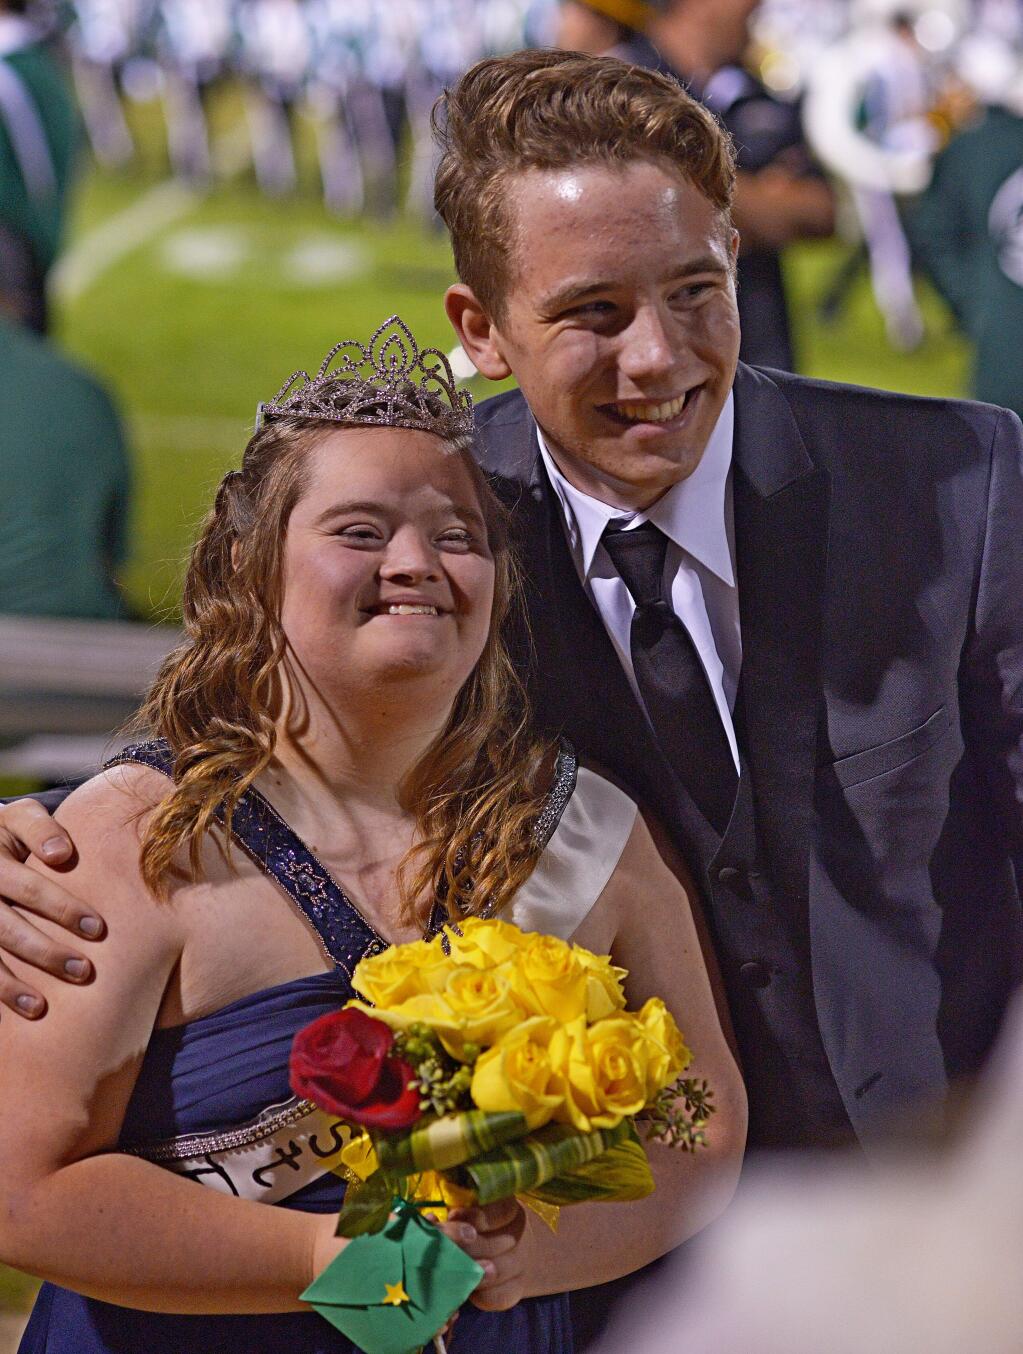 SUMNER FOWLER/FOR THE ARGUS-COURIERCasa Grande High School senior Danielle Kainz is all smiles after being crowned Homecoming Queen, as is her escort Caleb Dame.